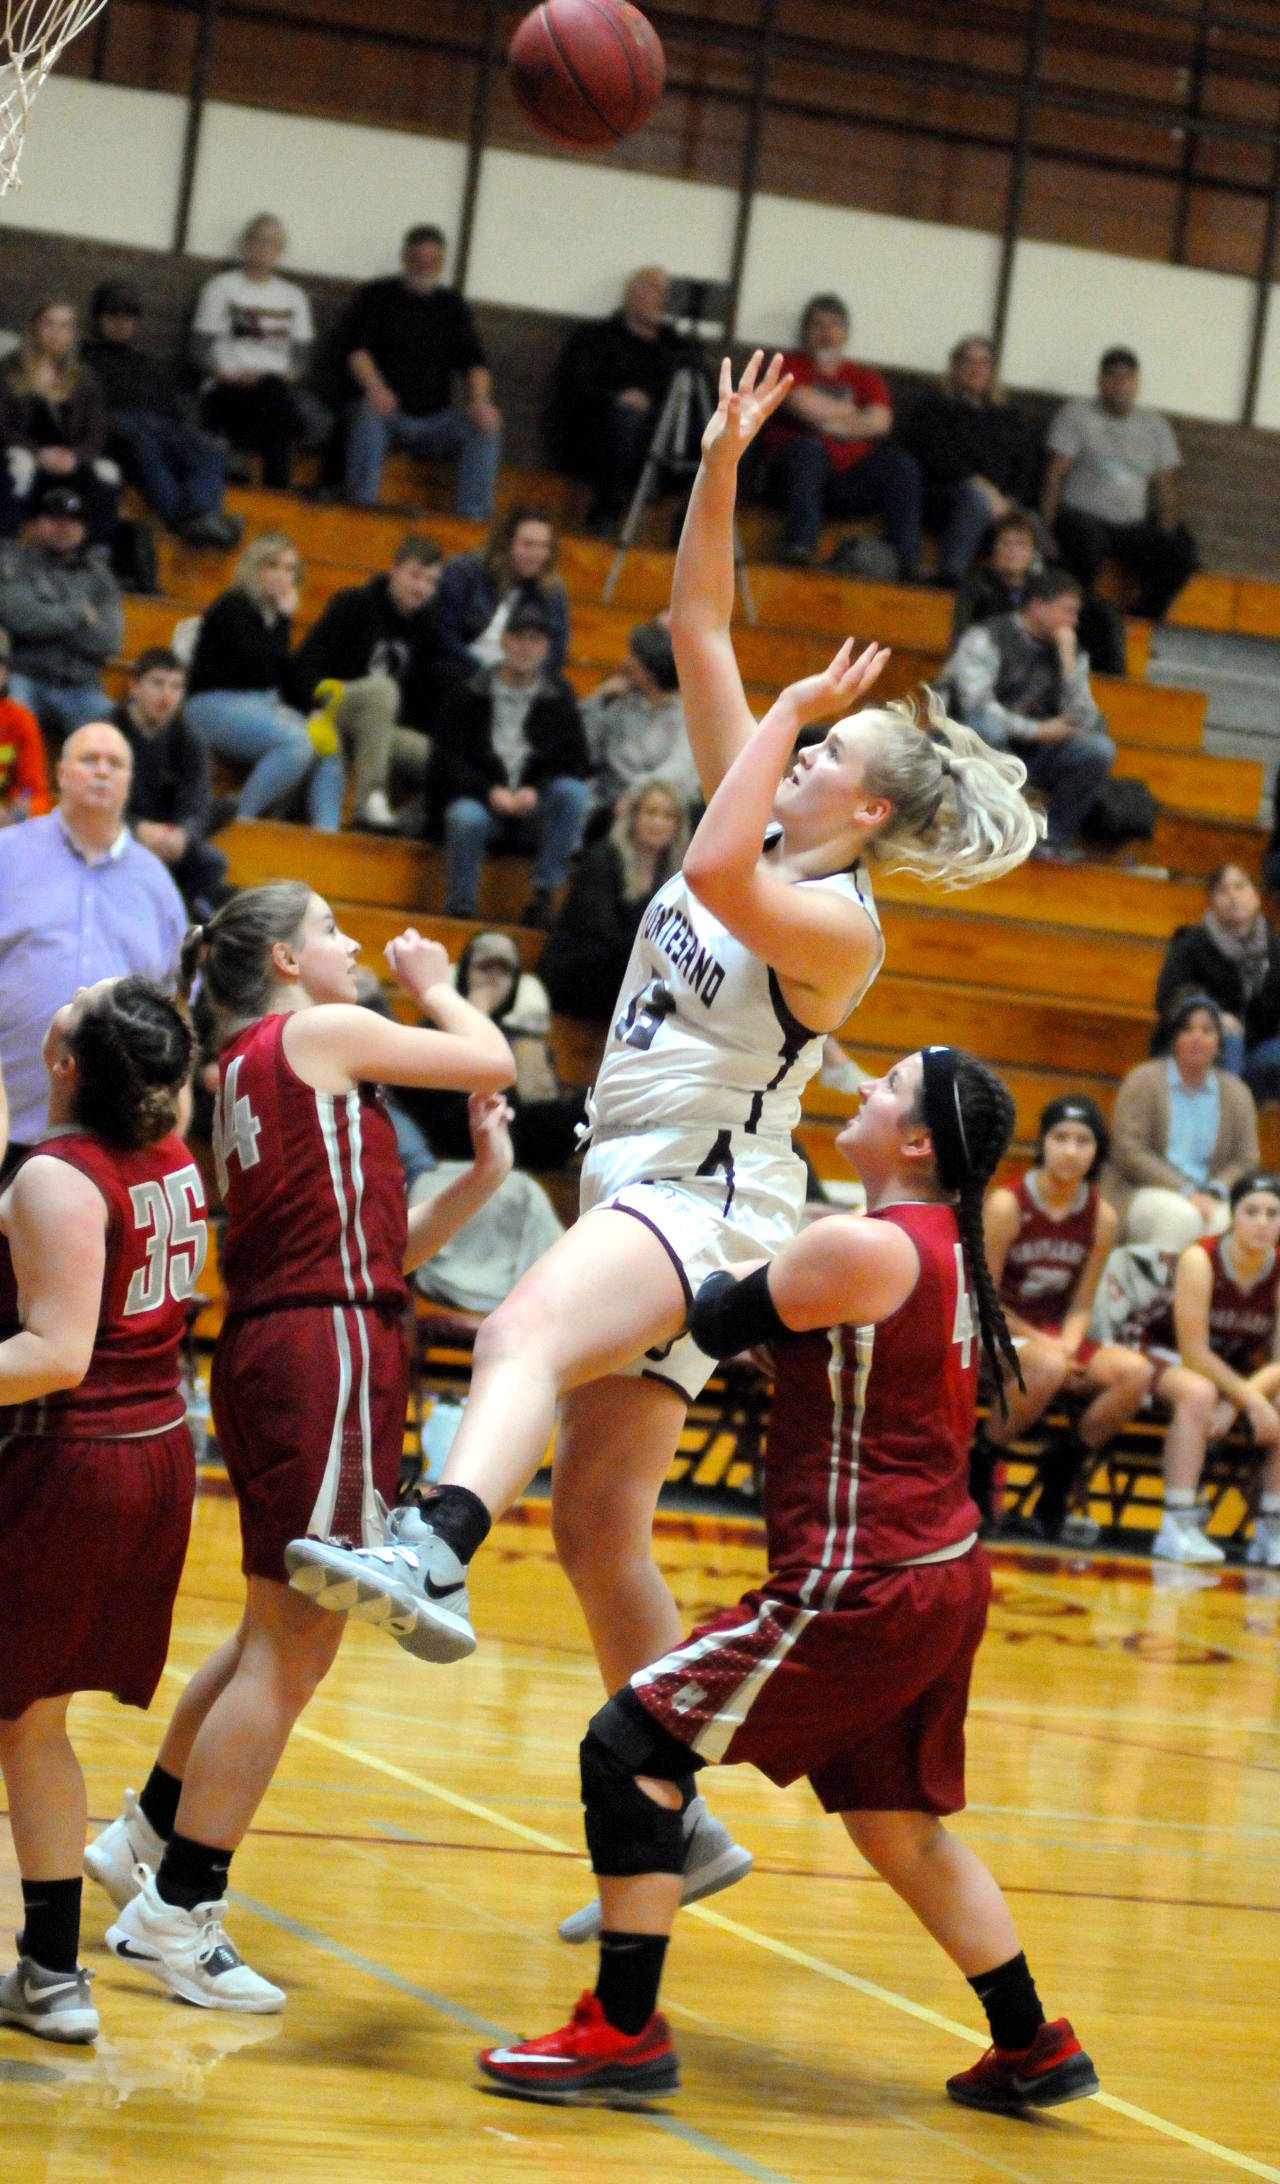 Montesano’s Zoe Hutchings scores two of her game-high 30 points to lead the Bulldogs to a 67-22 victory over Hoquiam on Tuesday at Montesano High School. (Ryan Sparks | Grays Harbor News Group)